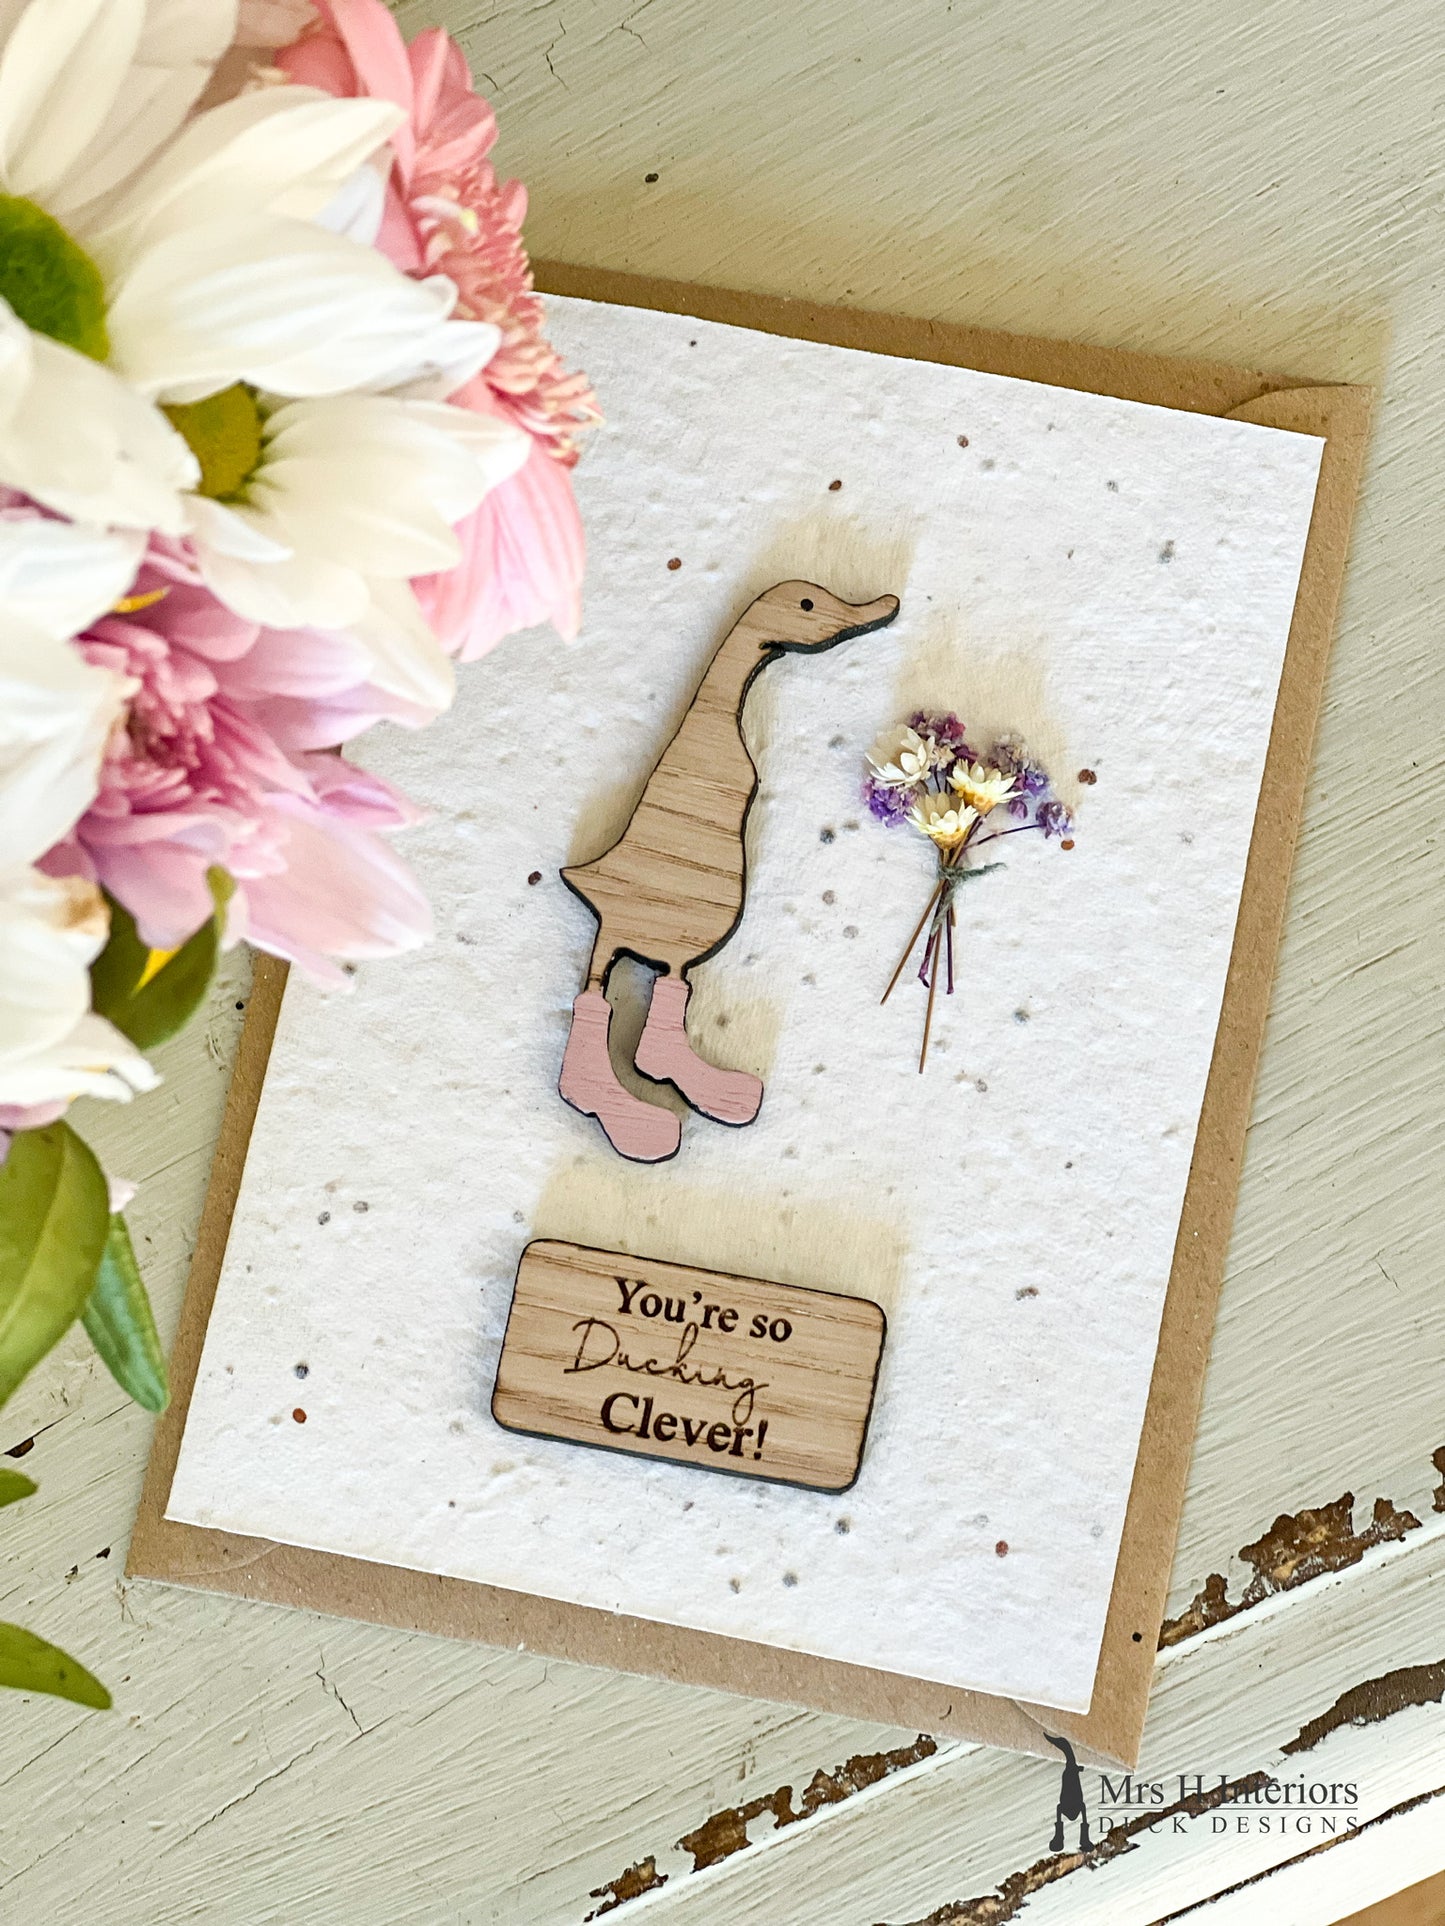 You're So Ducking Clever - Duck with Flowers - Greetings Card - Decorated Wooden Duck in Boots by Mrs H the Duck Lady